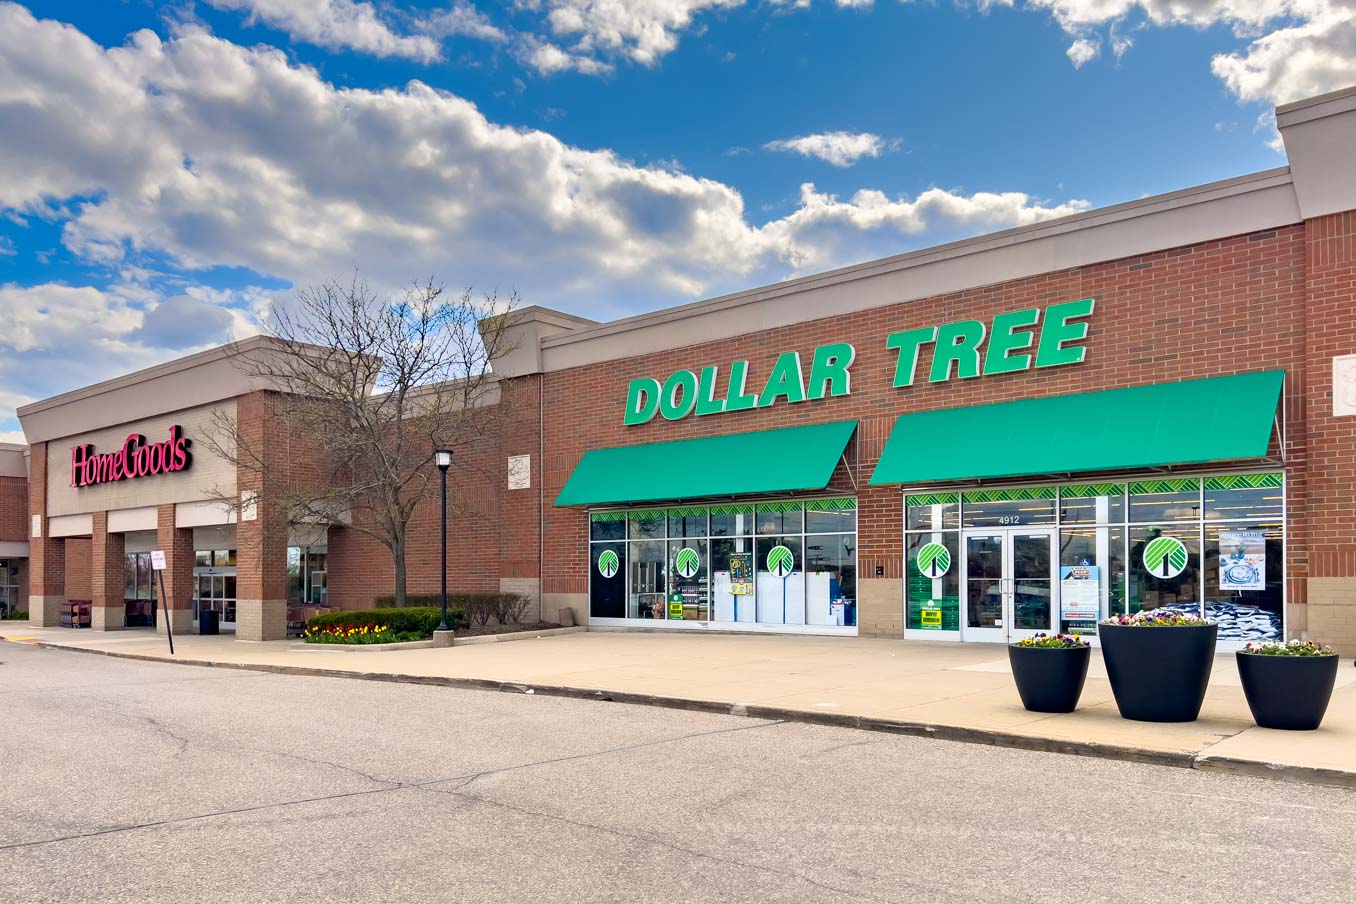 Baldwin Commons Dollar Tree storefront and entrance